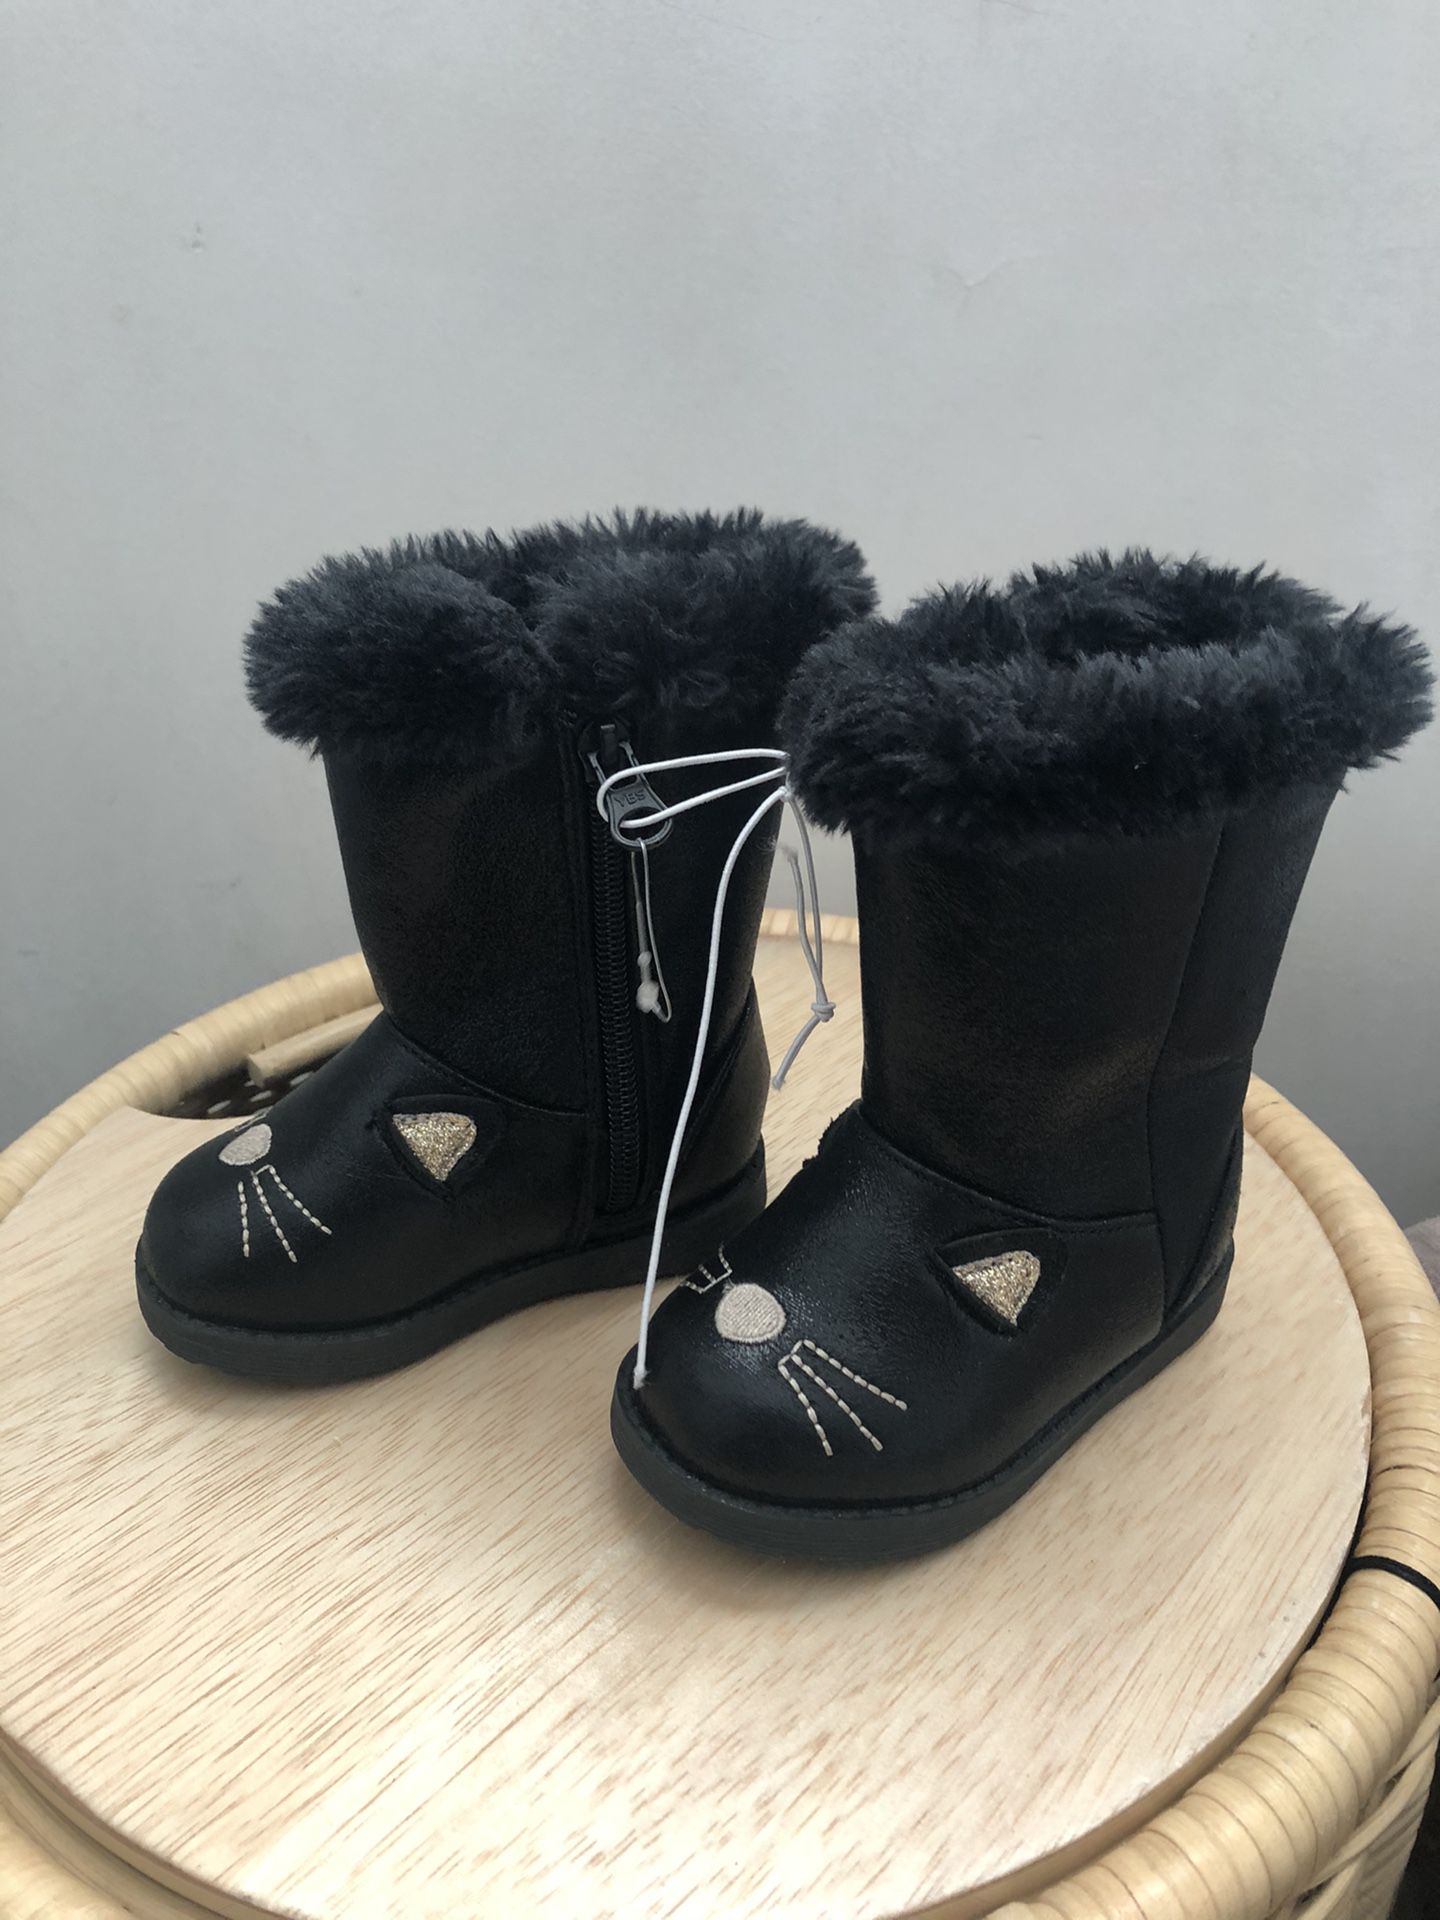 New cat and jack toddler girl warm boots